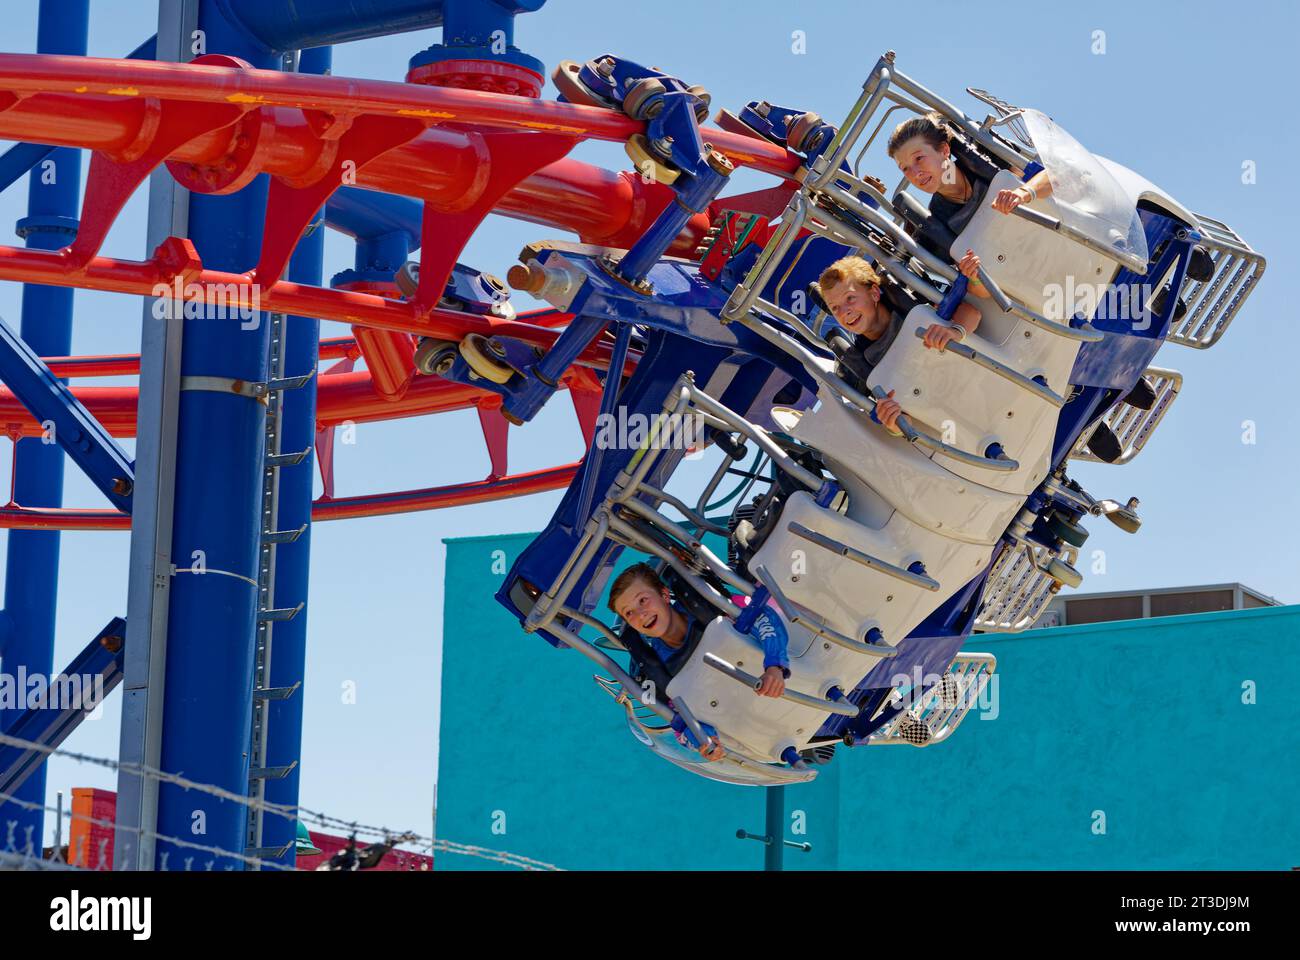 Soarin’ Eagle is a roller coaster with a twist – you “fly” in head-first prone position, instead of seated in carriages. Stock Photo